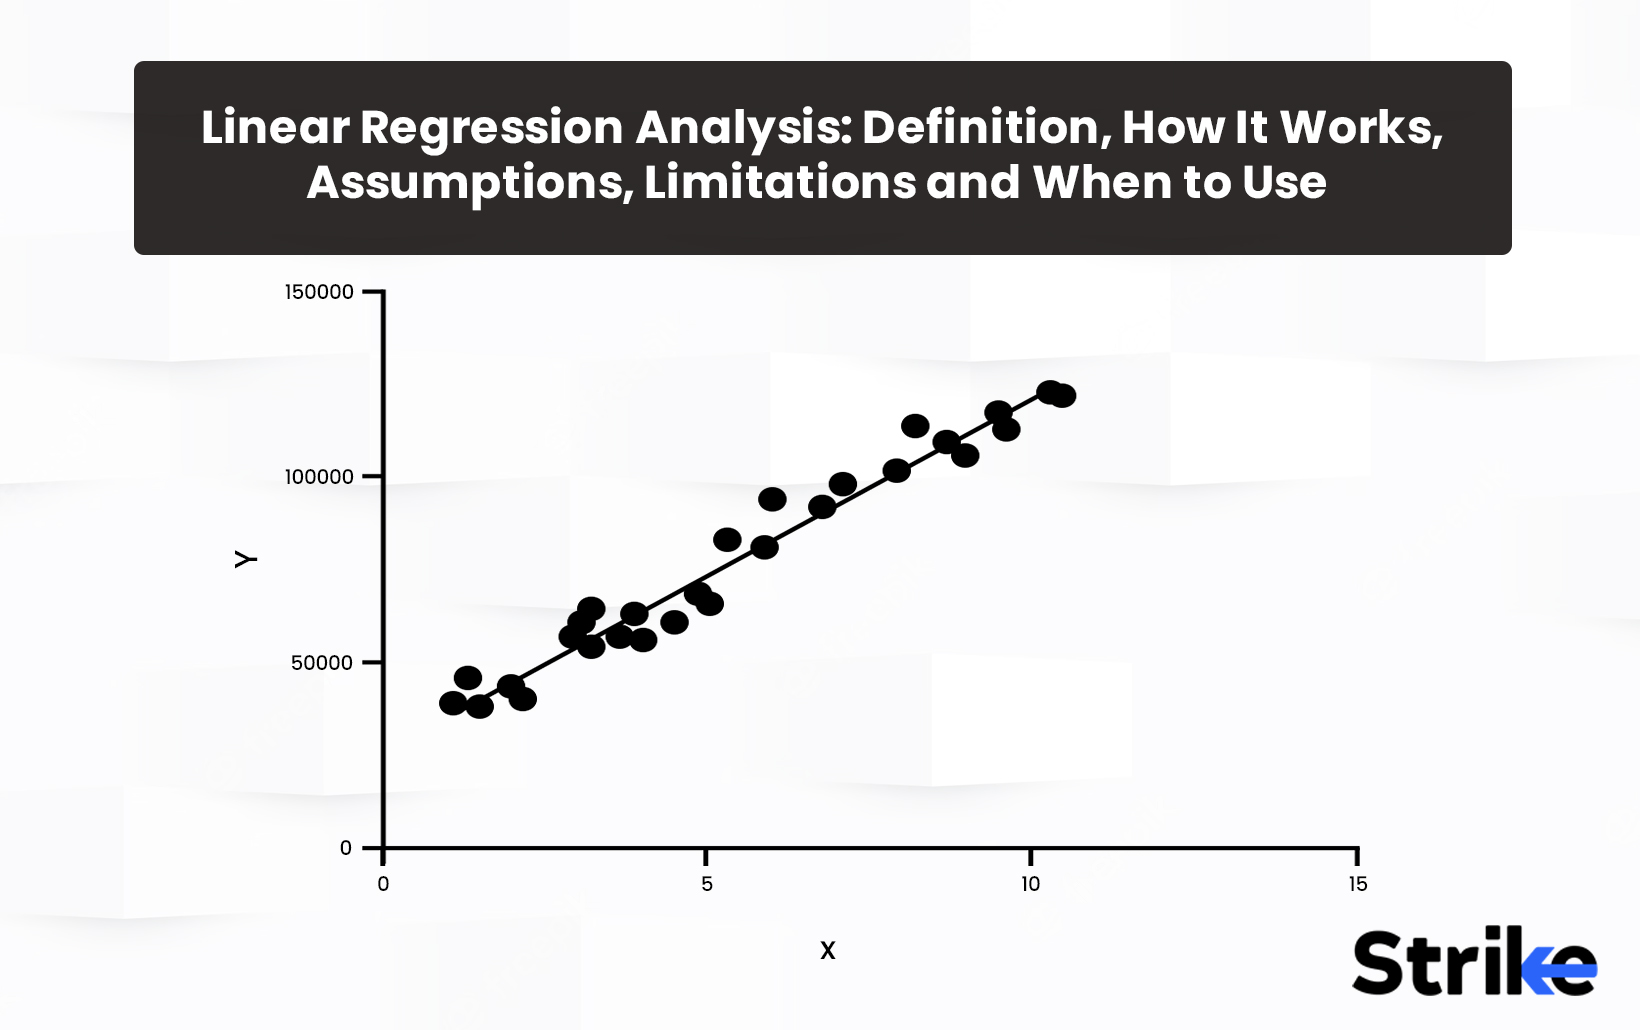 Linear Regression Analysis: Definition, How It Works, Assumptions, Limitations and When to Use